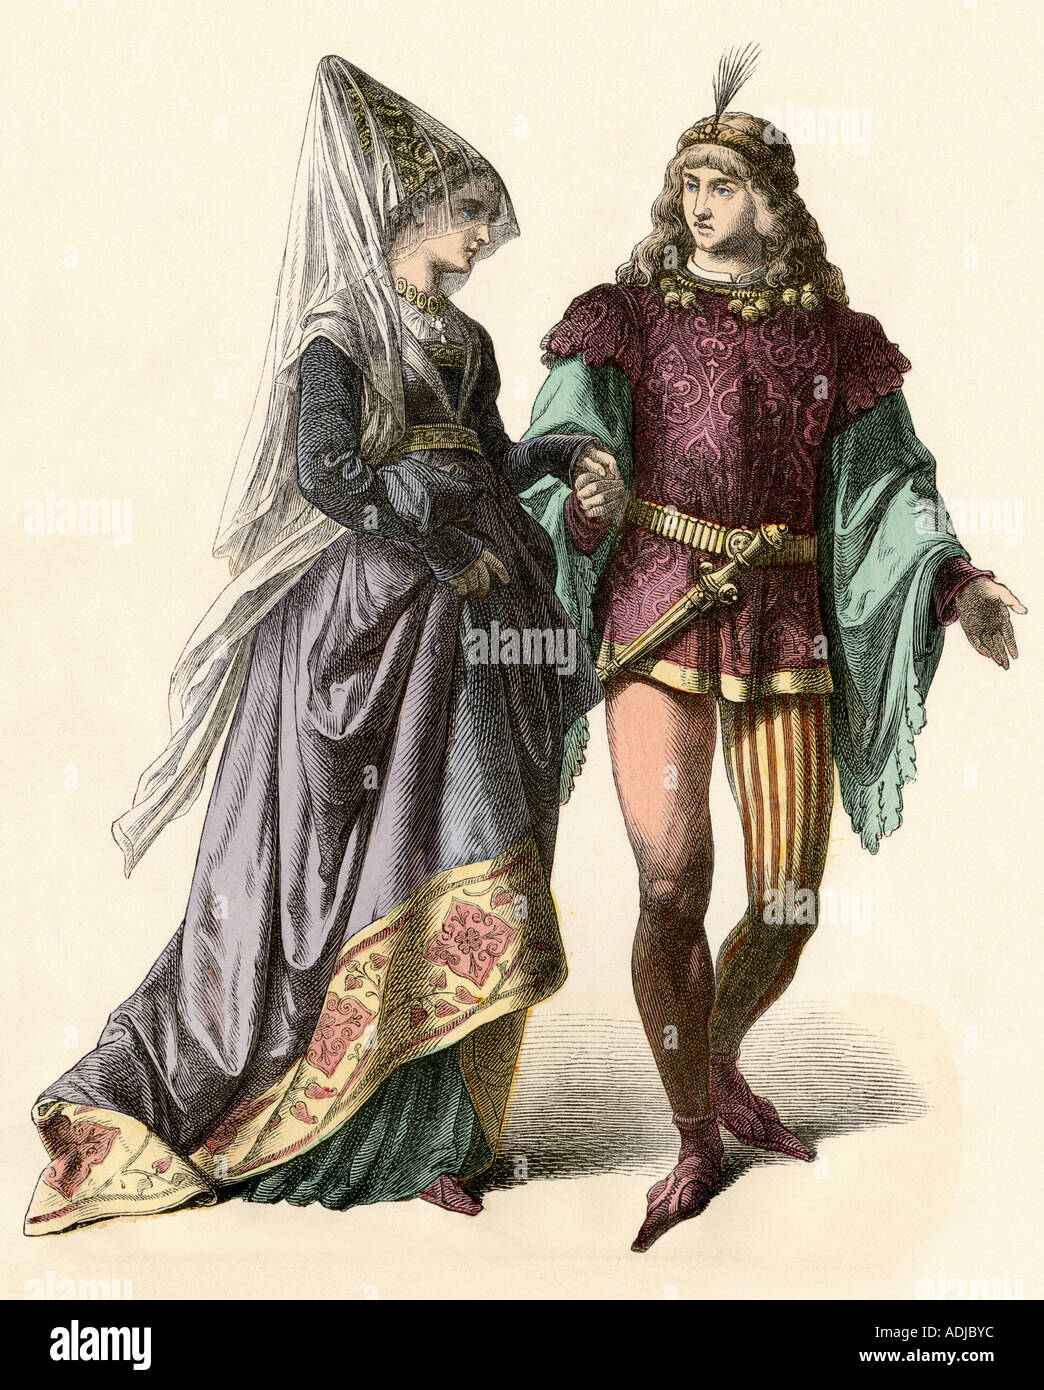 Noblewoman of Burgundy courted in the 1400s. Hand-colored print Stock Photo